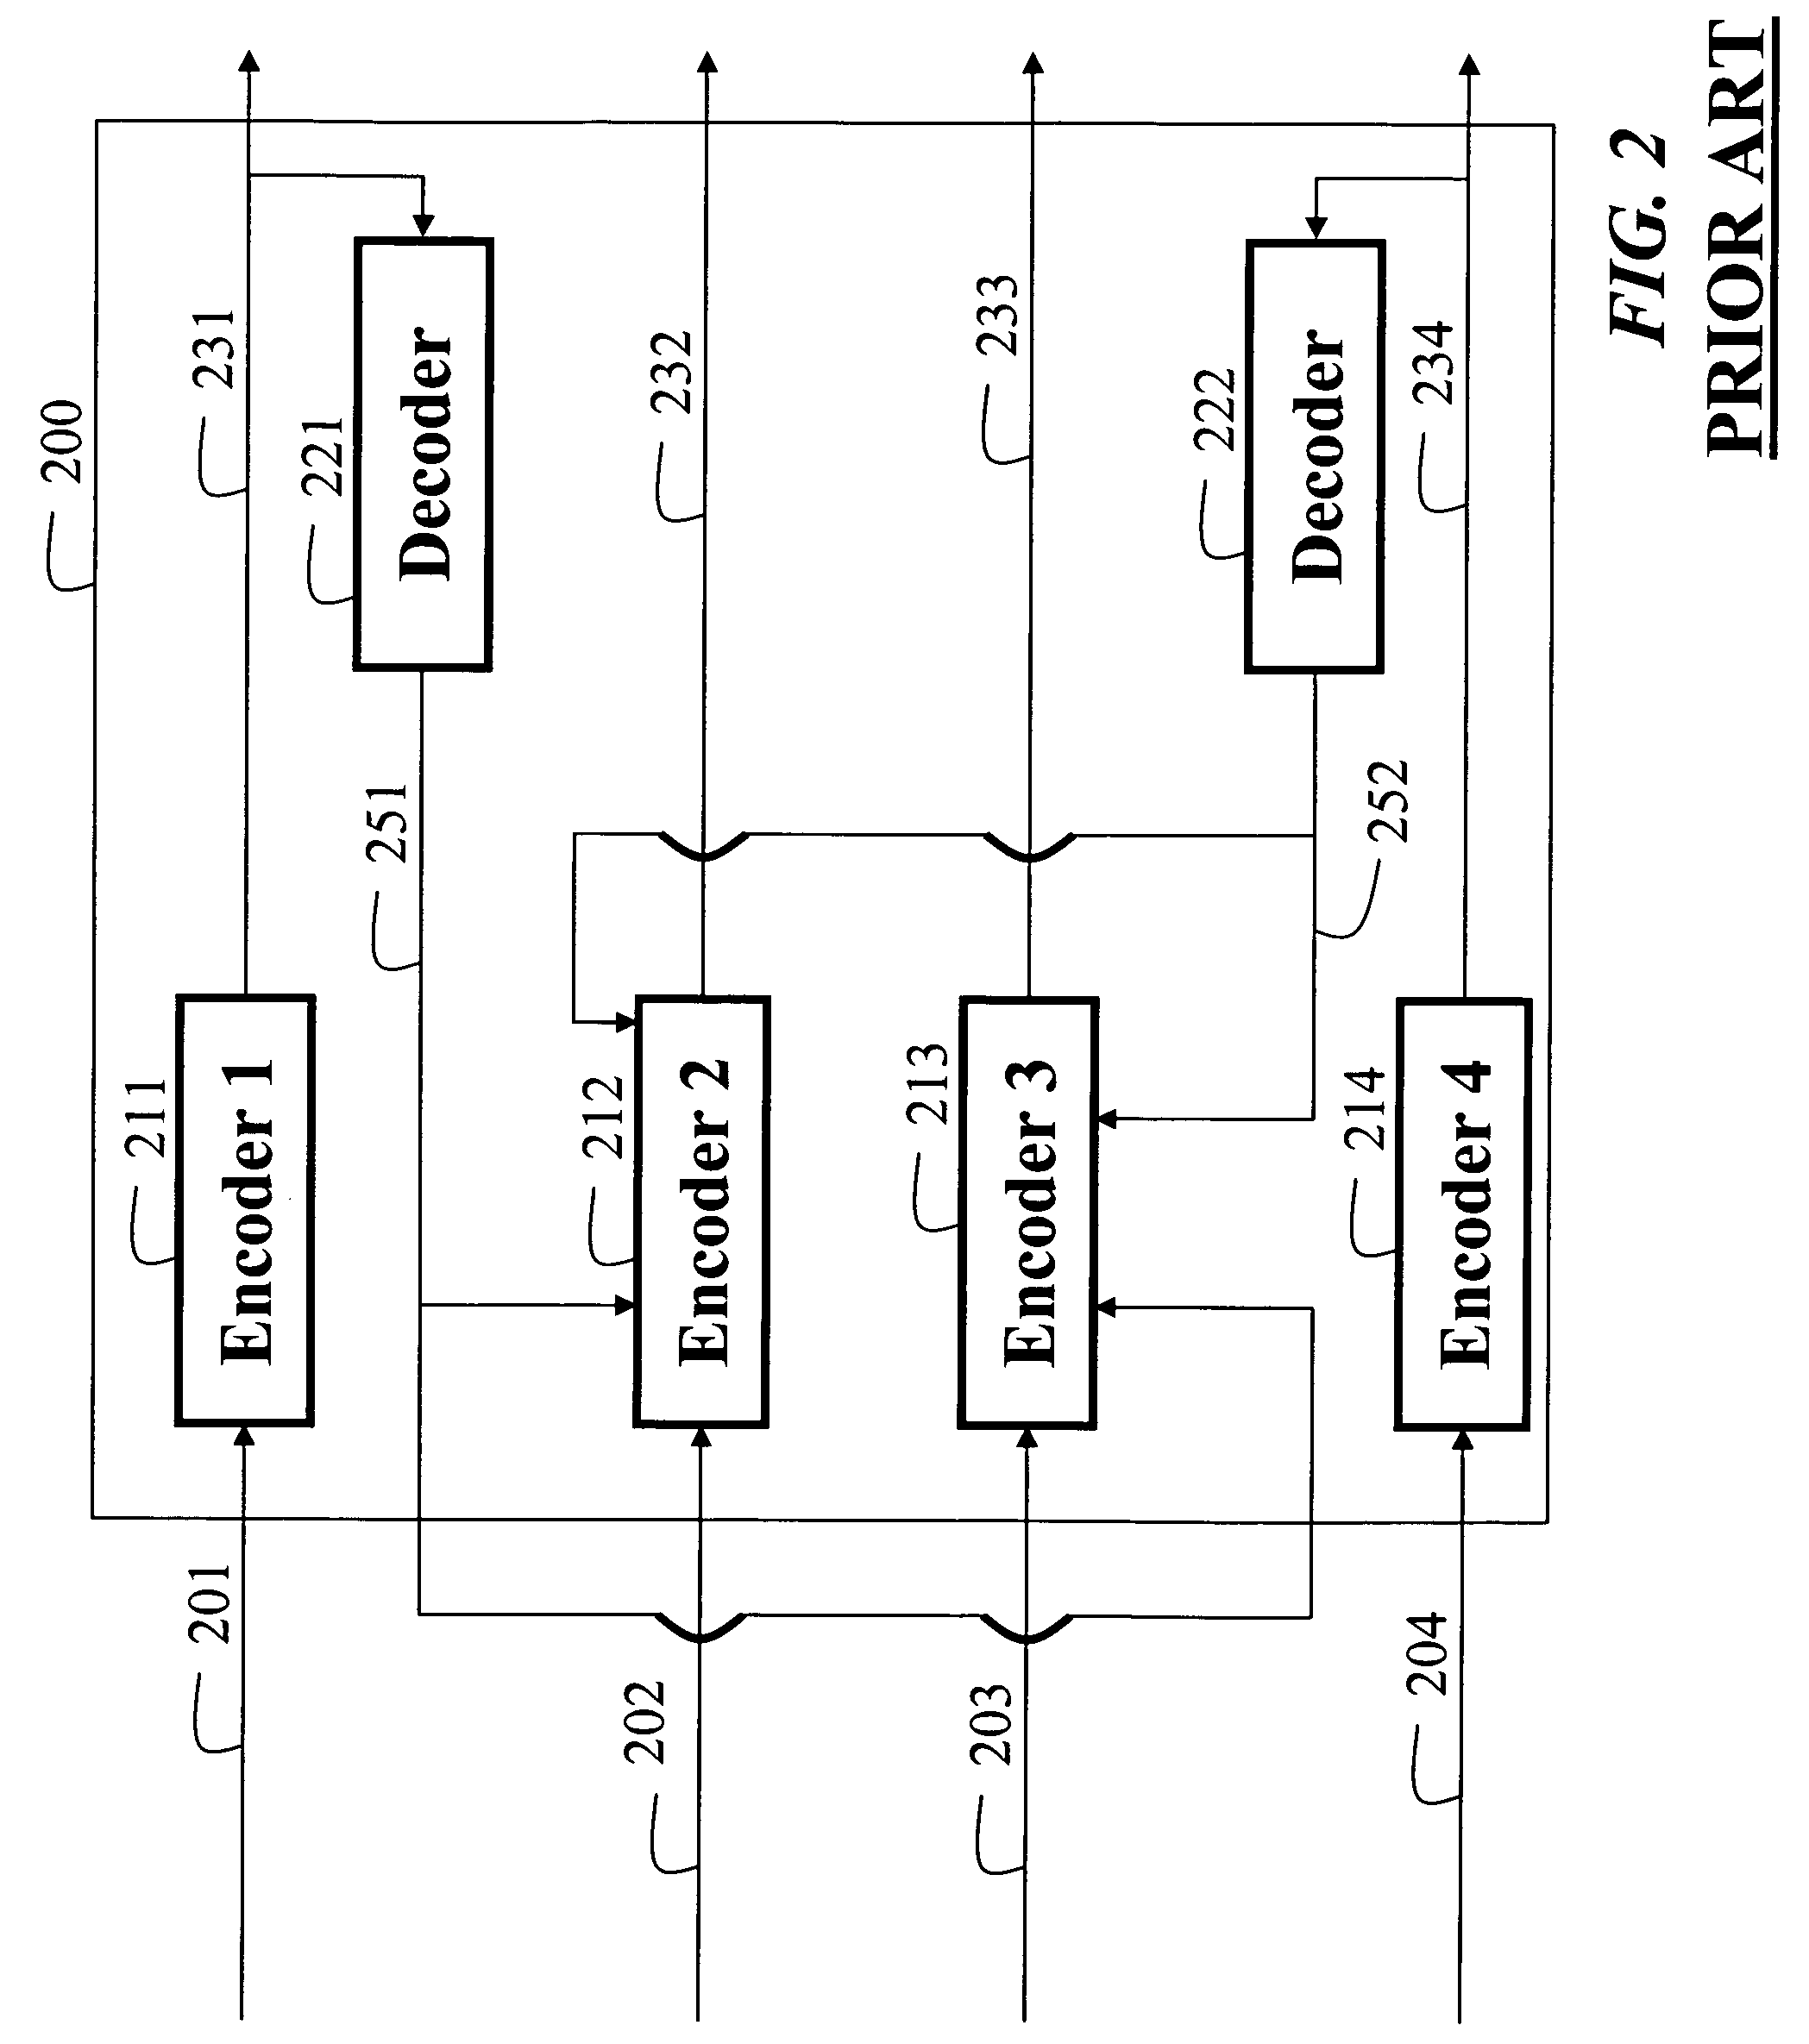 Method and system for synthesizing multiview videos